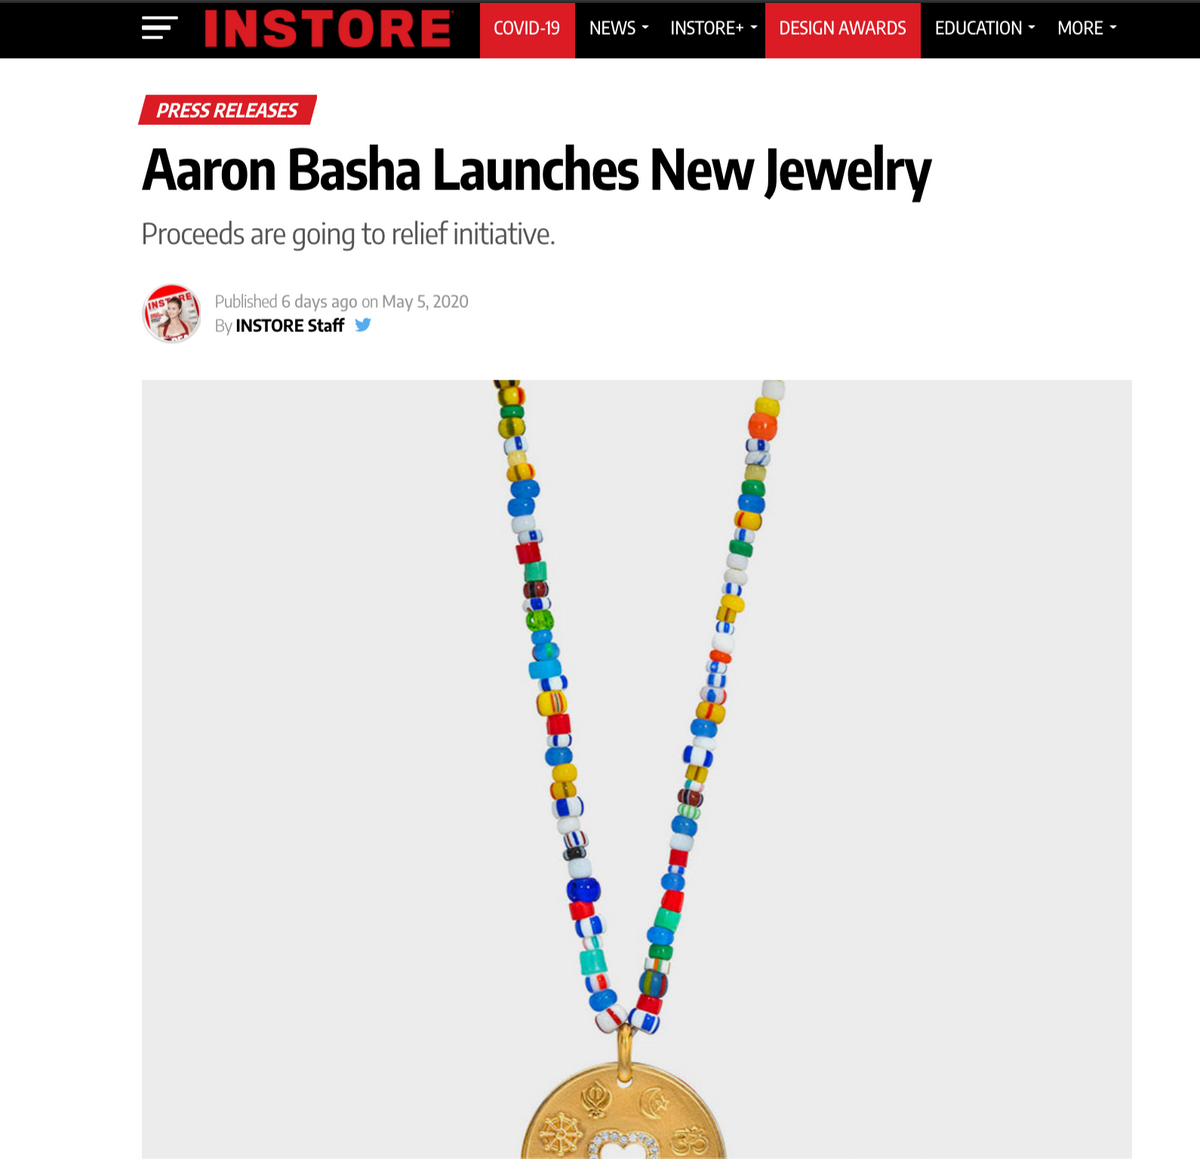 Aaron Basha Launches New Jewelry Proceeds are going to relief initiative.